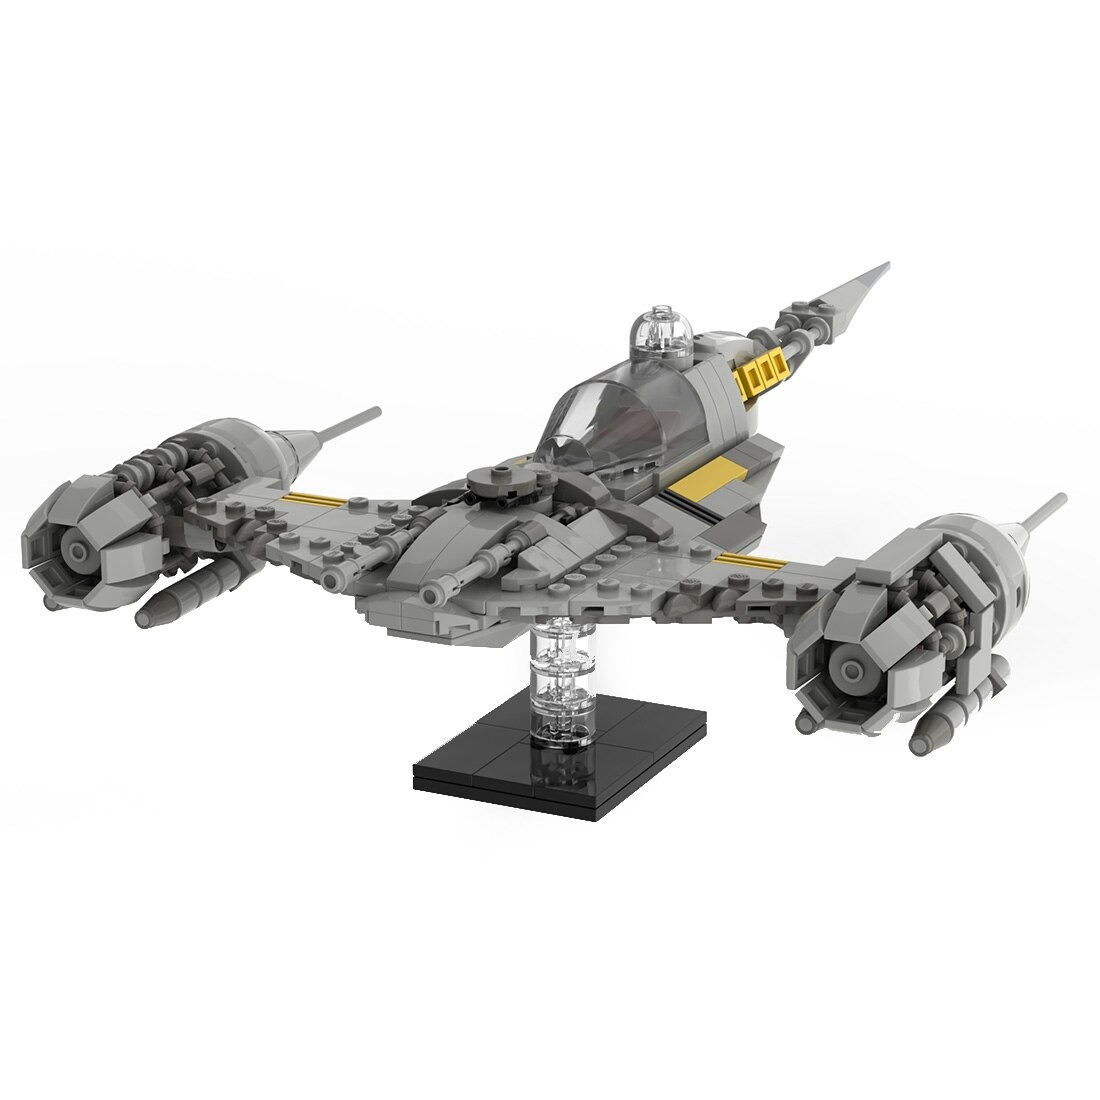 authorized moc 100546 n 1 starfighter bui main 4 1 - DECOOL